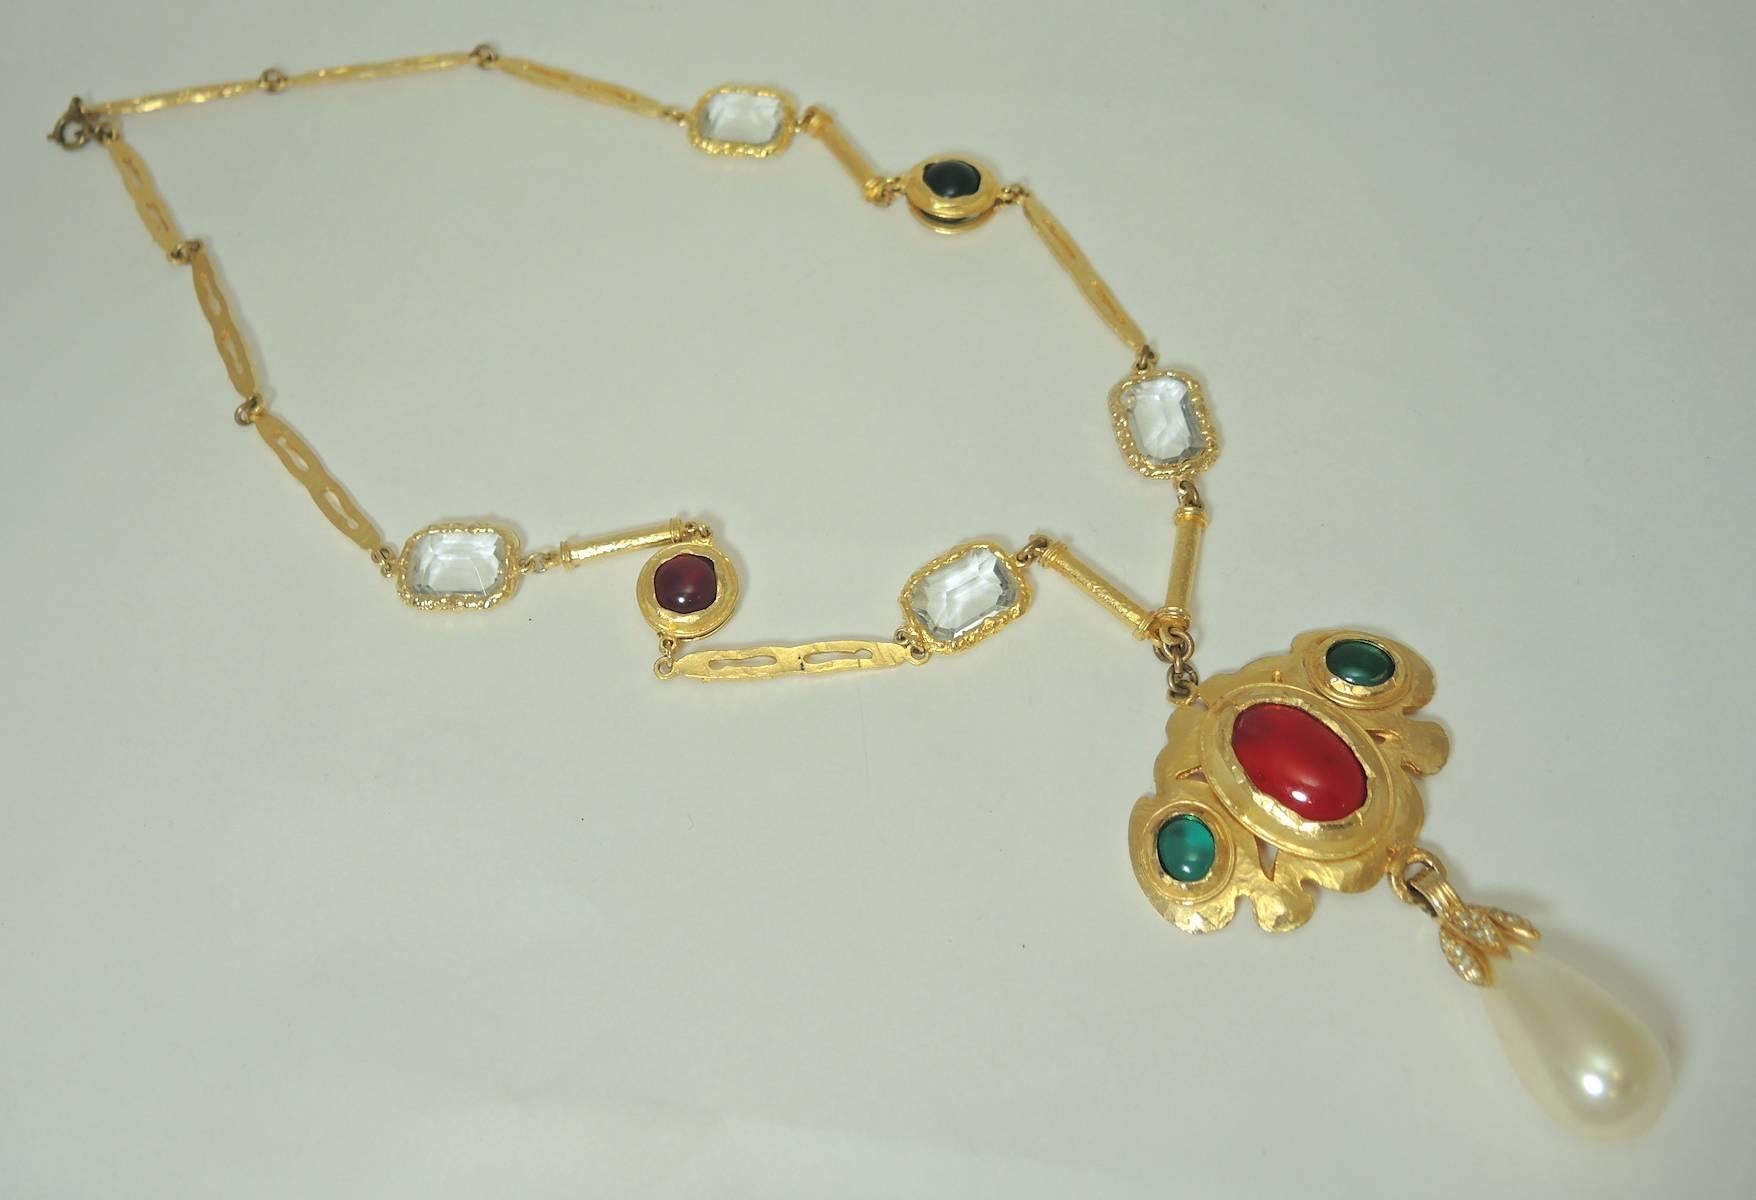 This necklace has red, green and clear faux glass chicklets making the necklace have an almost Chanel look. The centerpiece has a large red cabochon and two smaller green cabochons on each side.  A large dangling teardrop faux pearl hangs at the